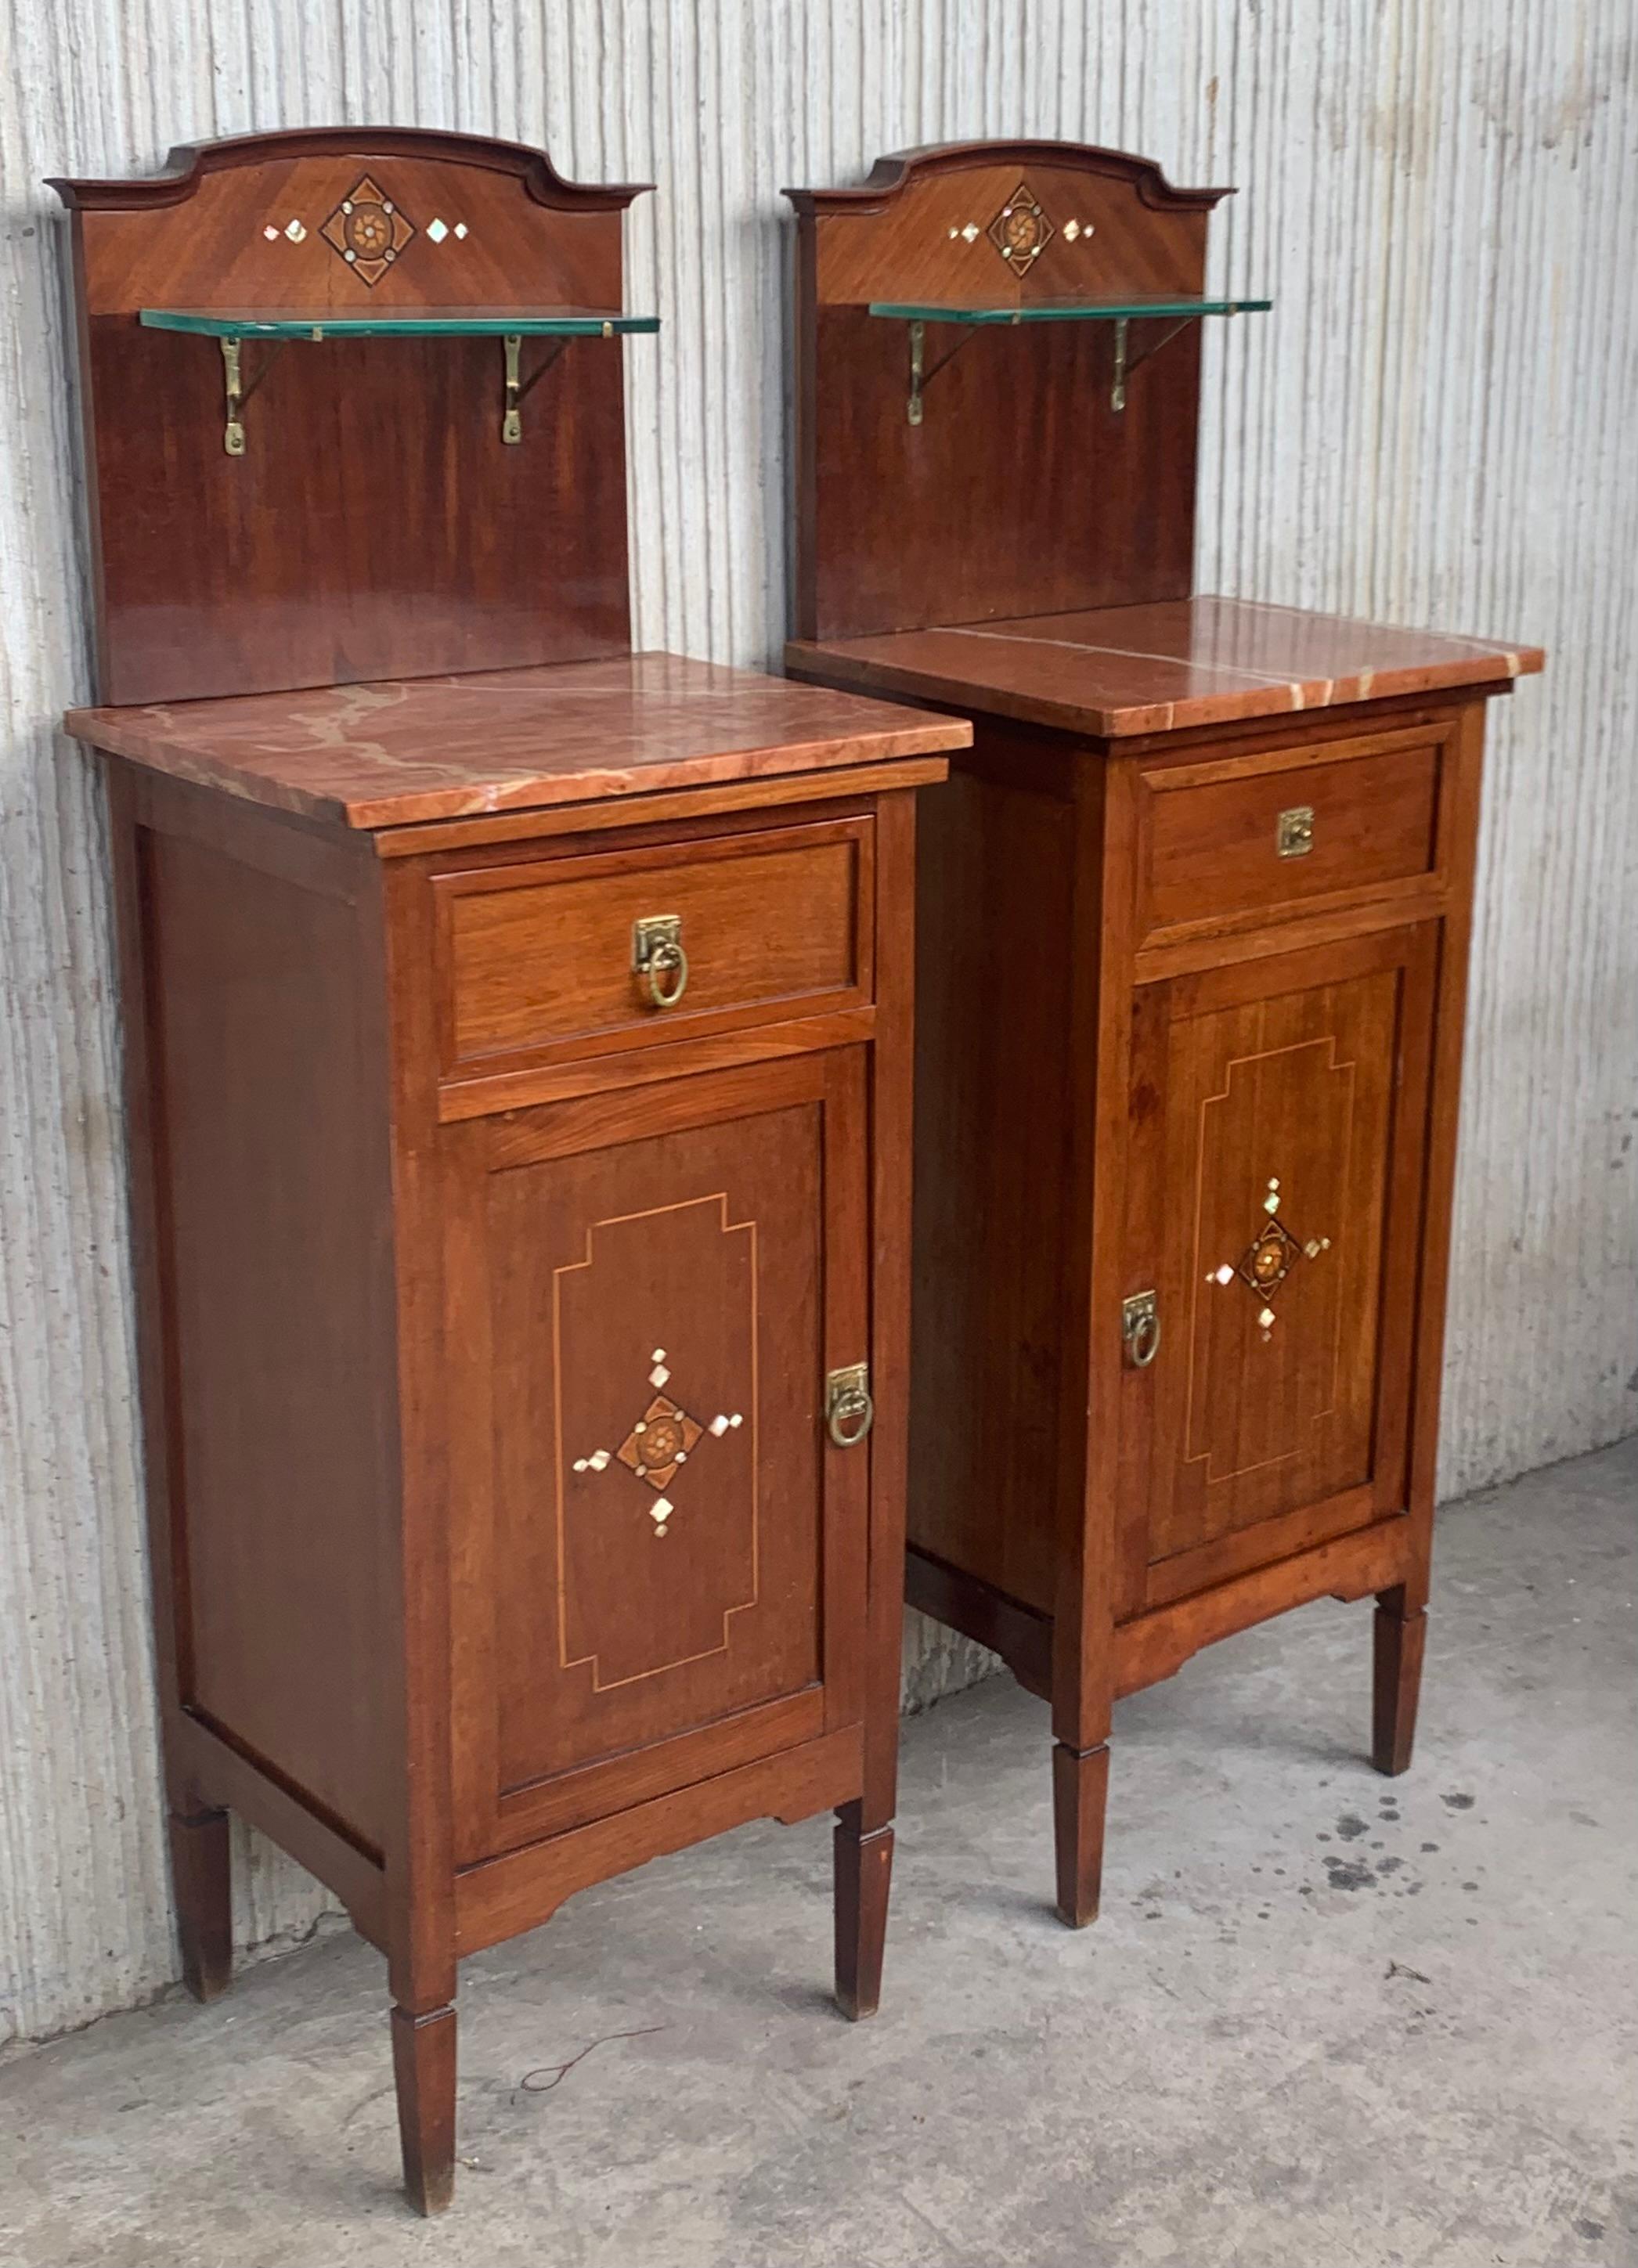 Modern 1900s, Art Nouveau Pair of Walnut Nightstands with Crest and Glass Shelve